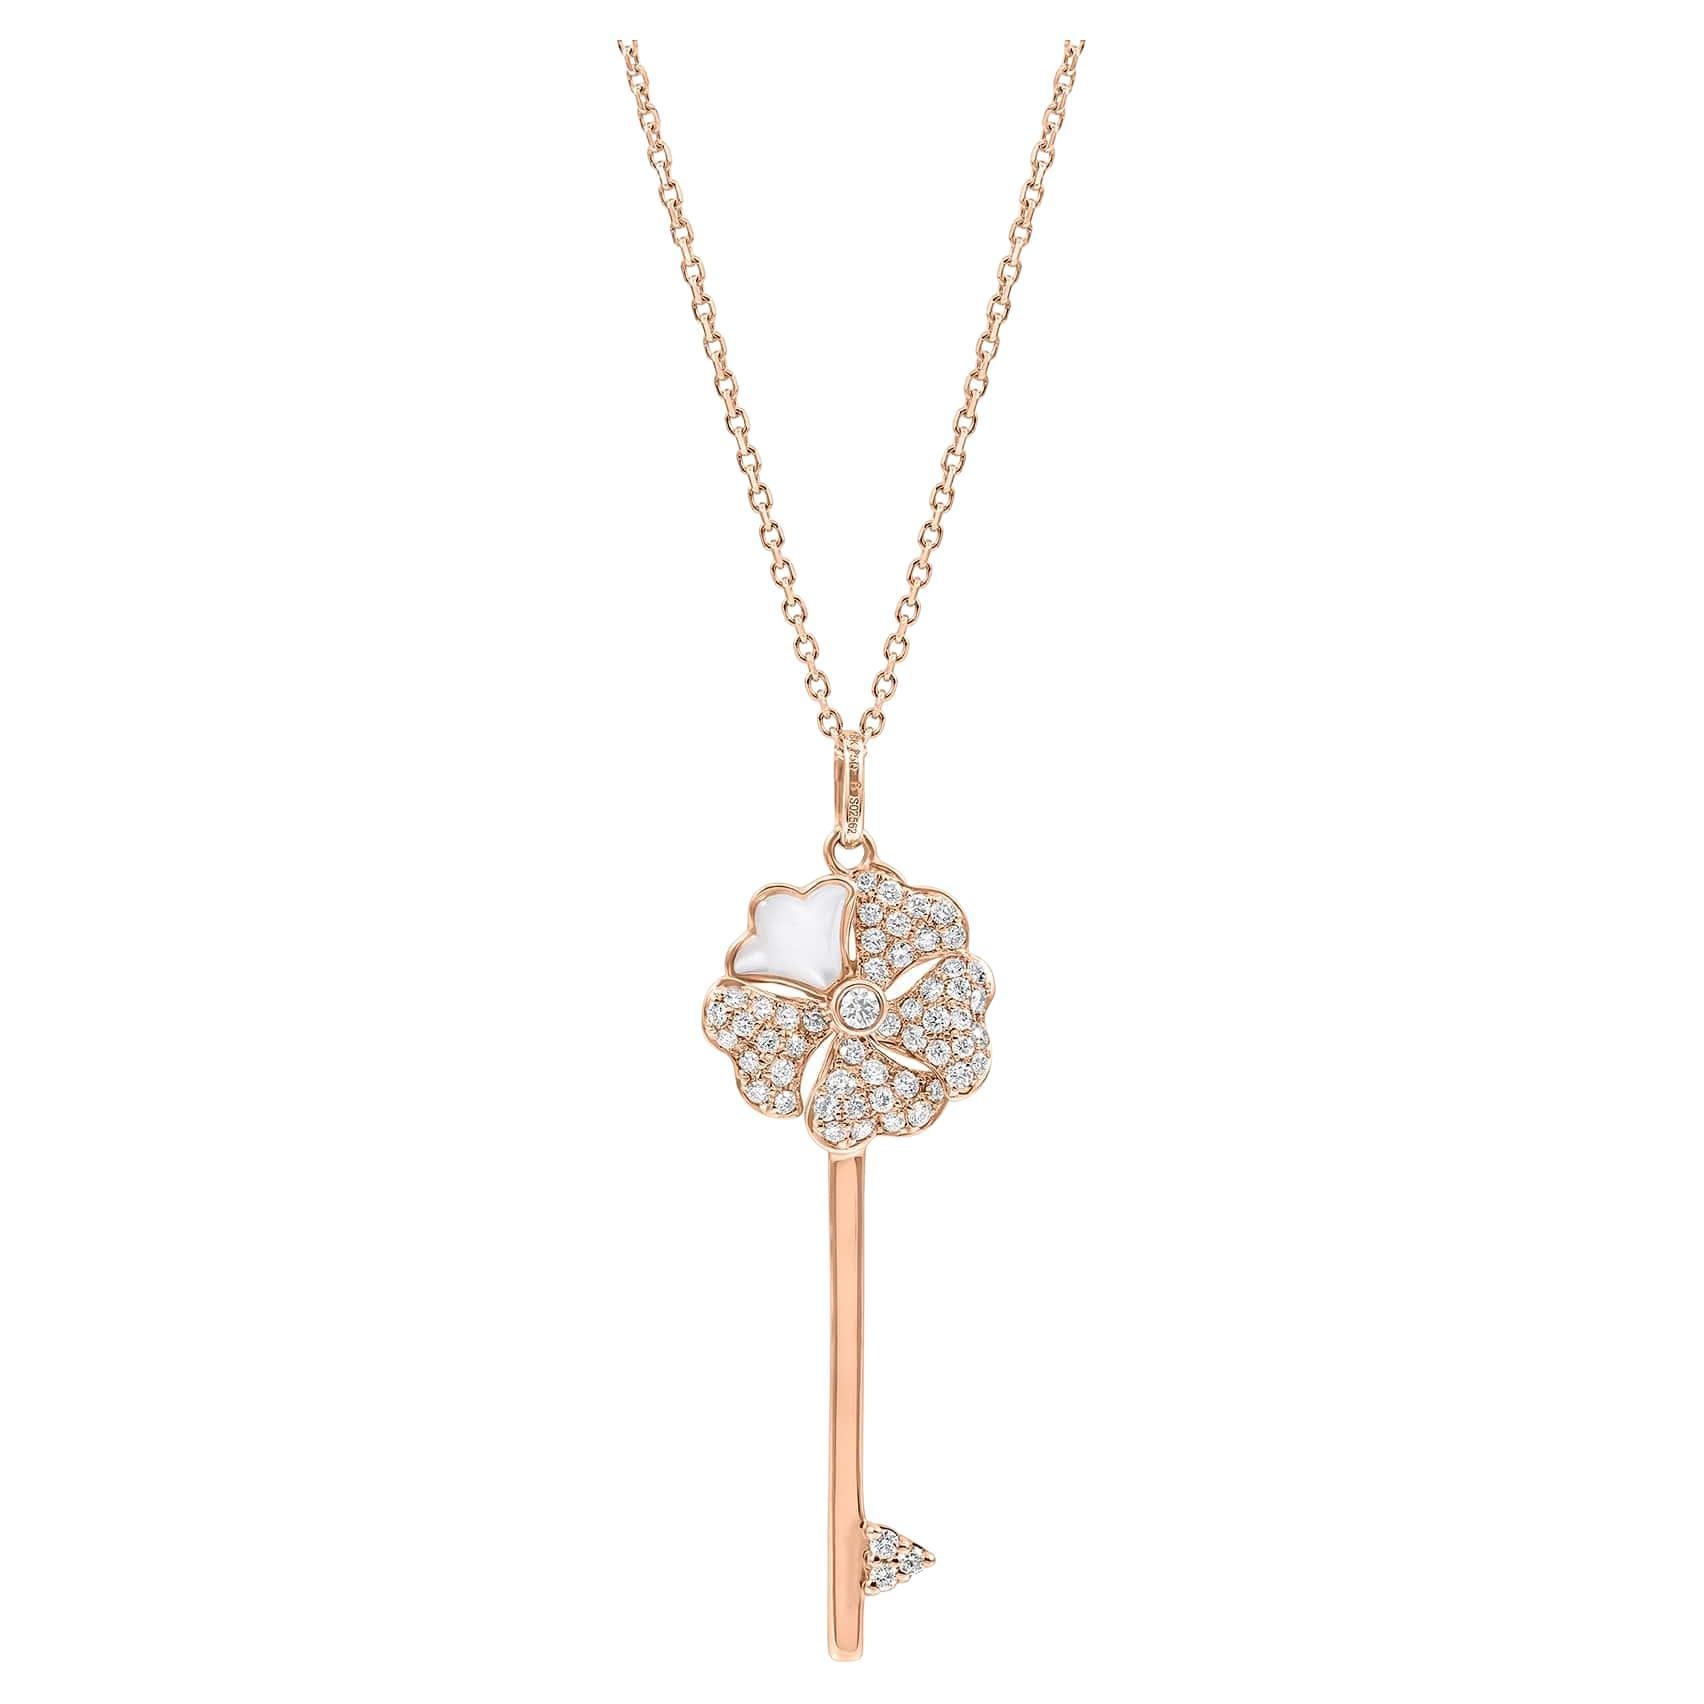 Bloom Diamond Key Necklace with Mother of Pearl in 18k Rose Gold